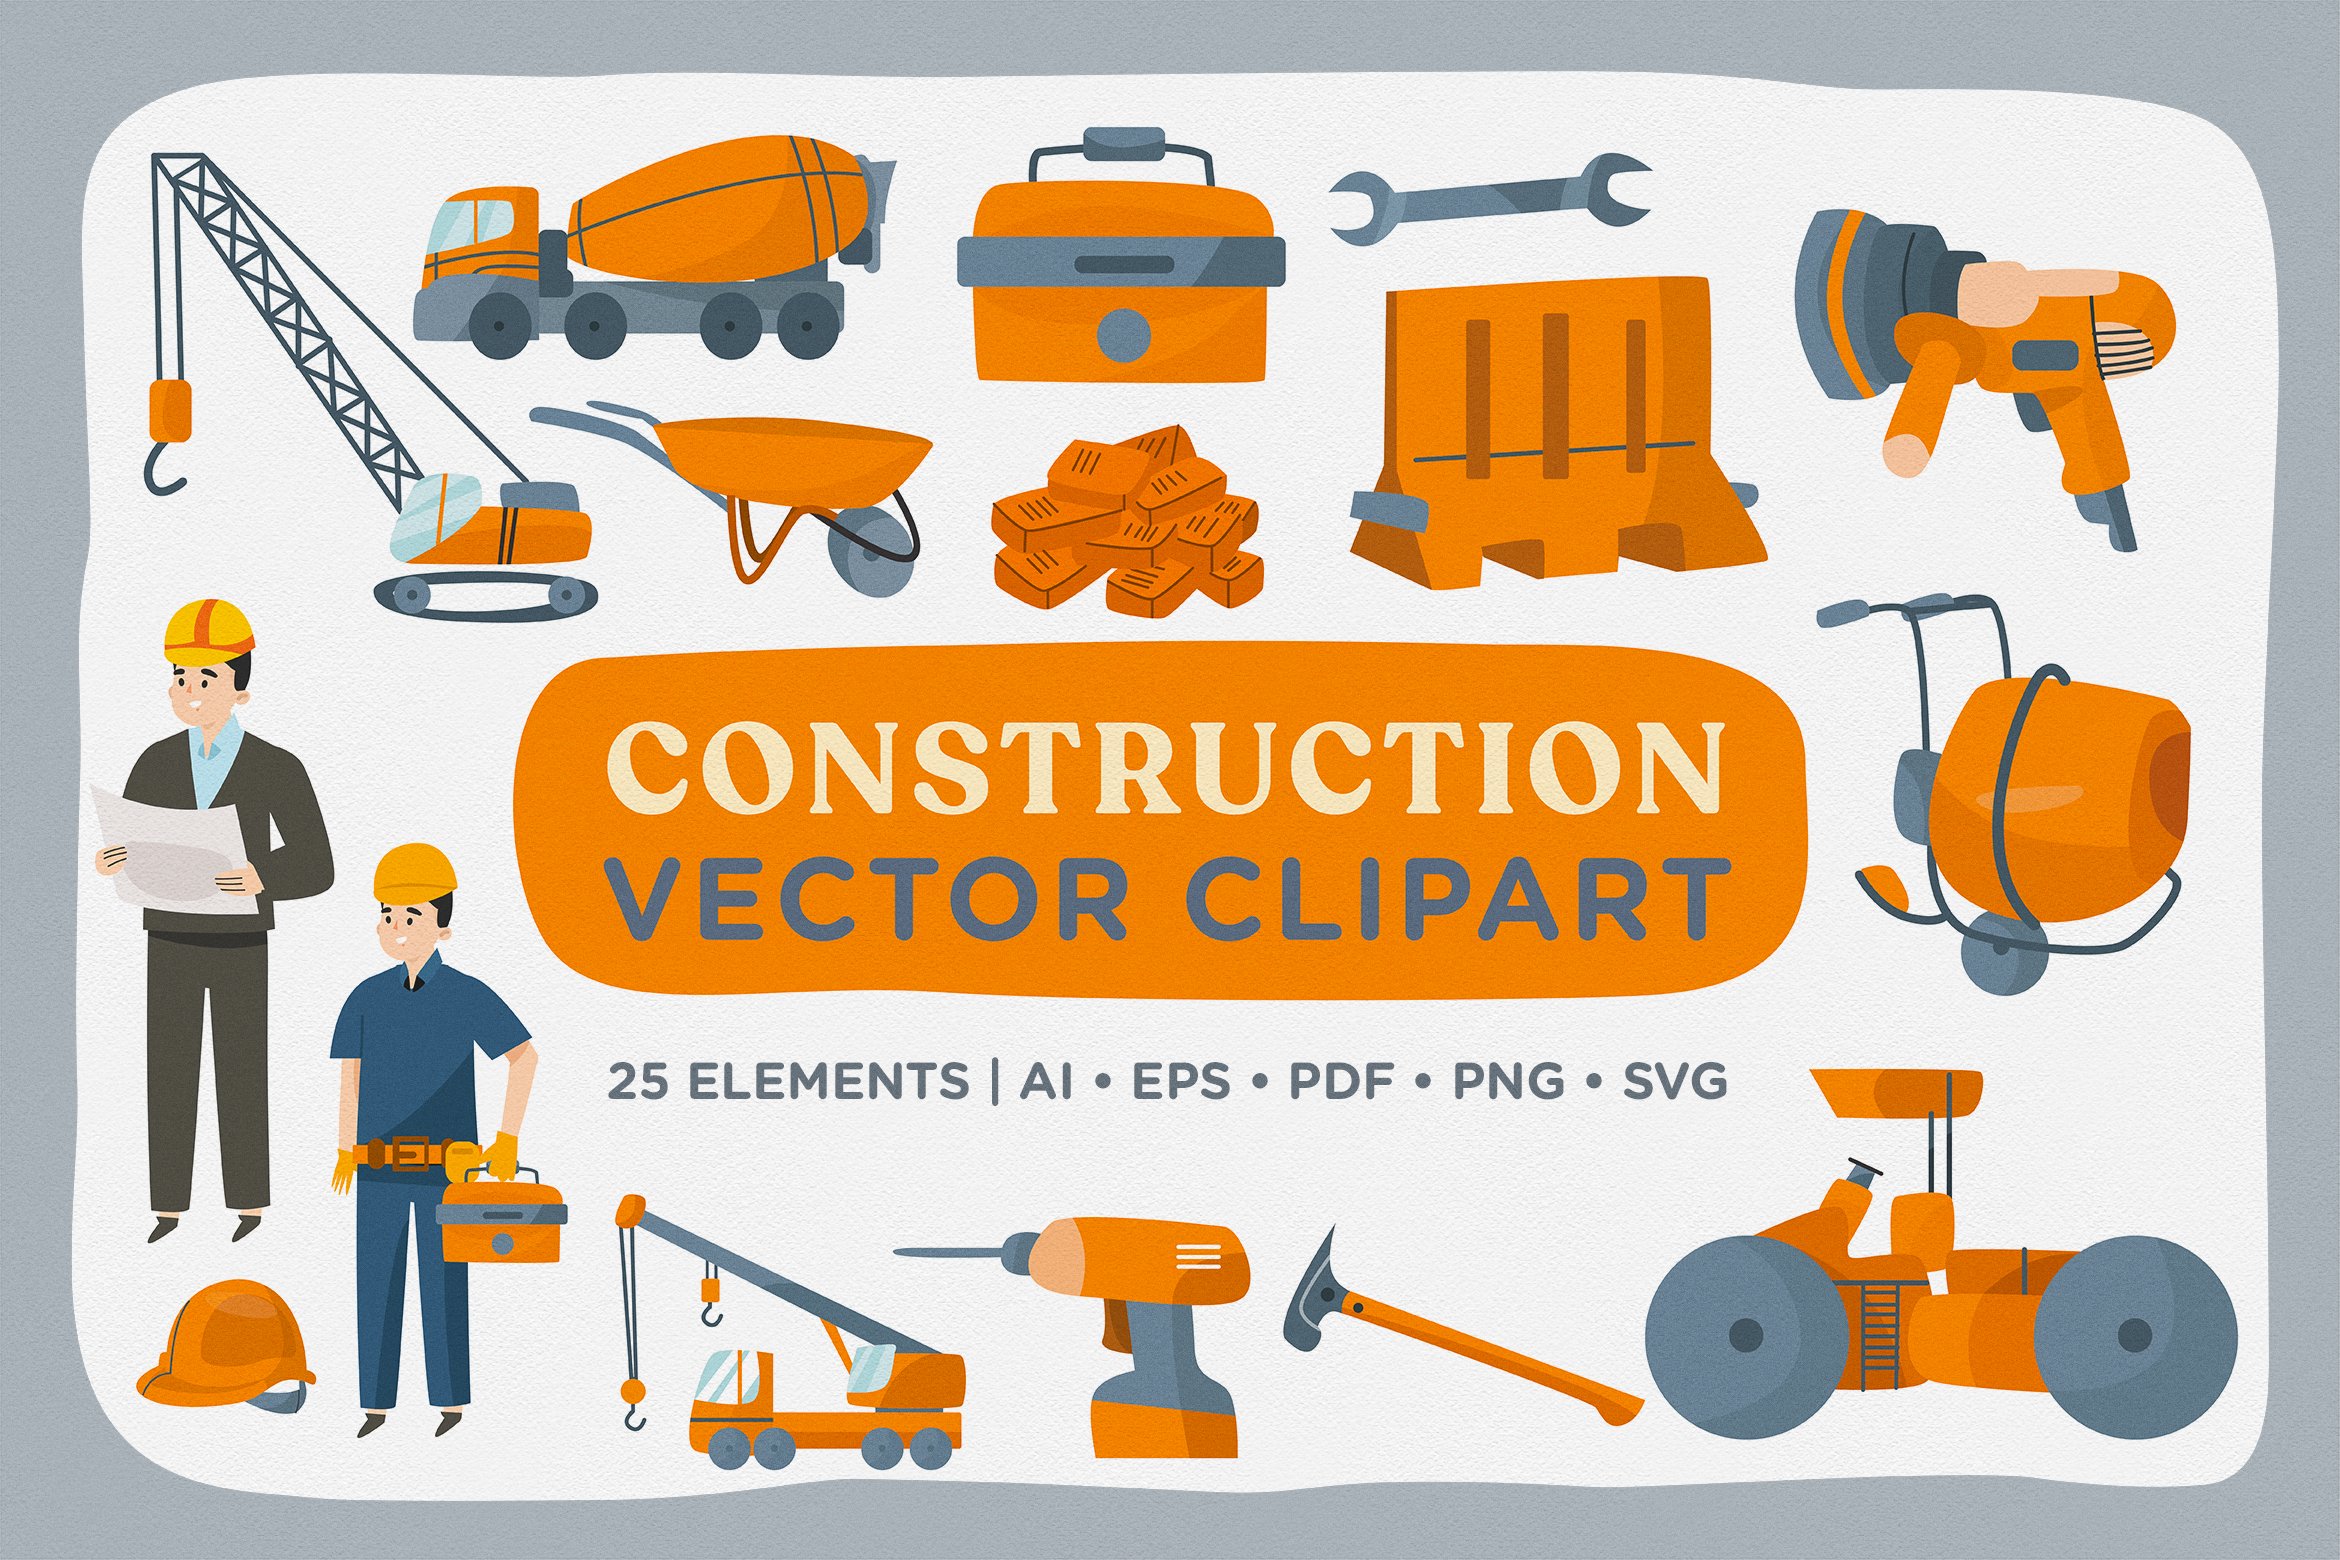 Construction Vector Clipart Pack cover image.